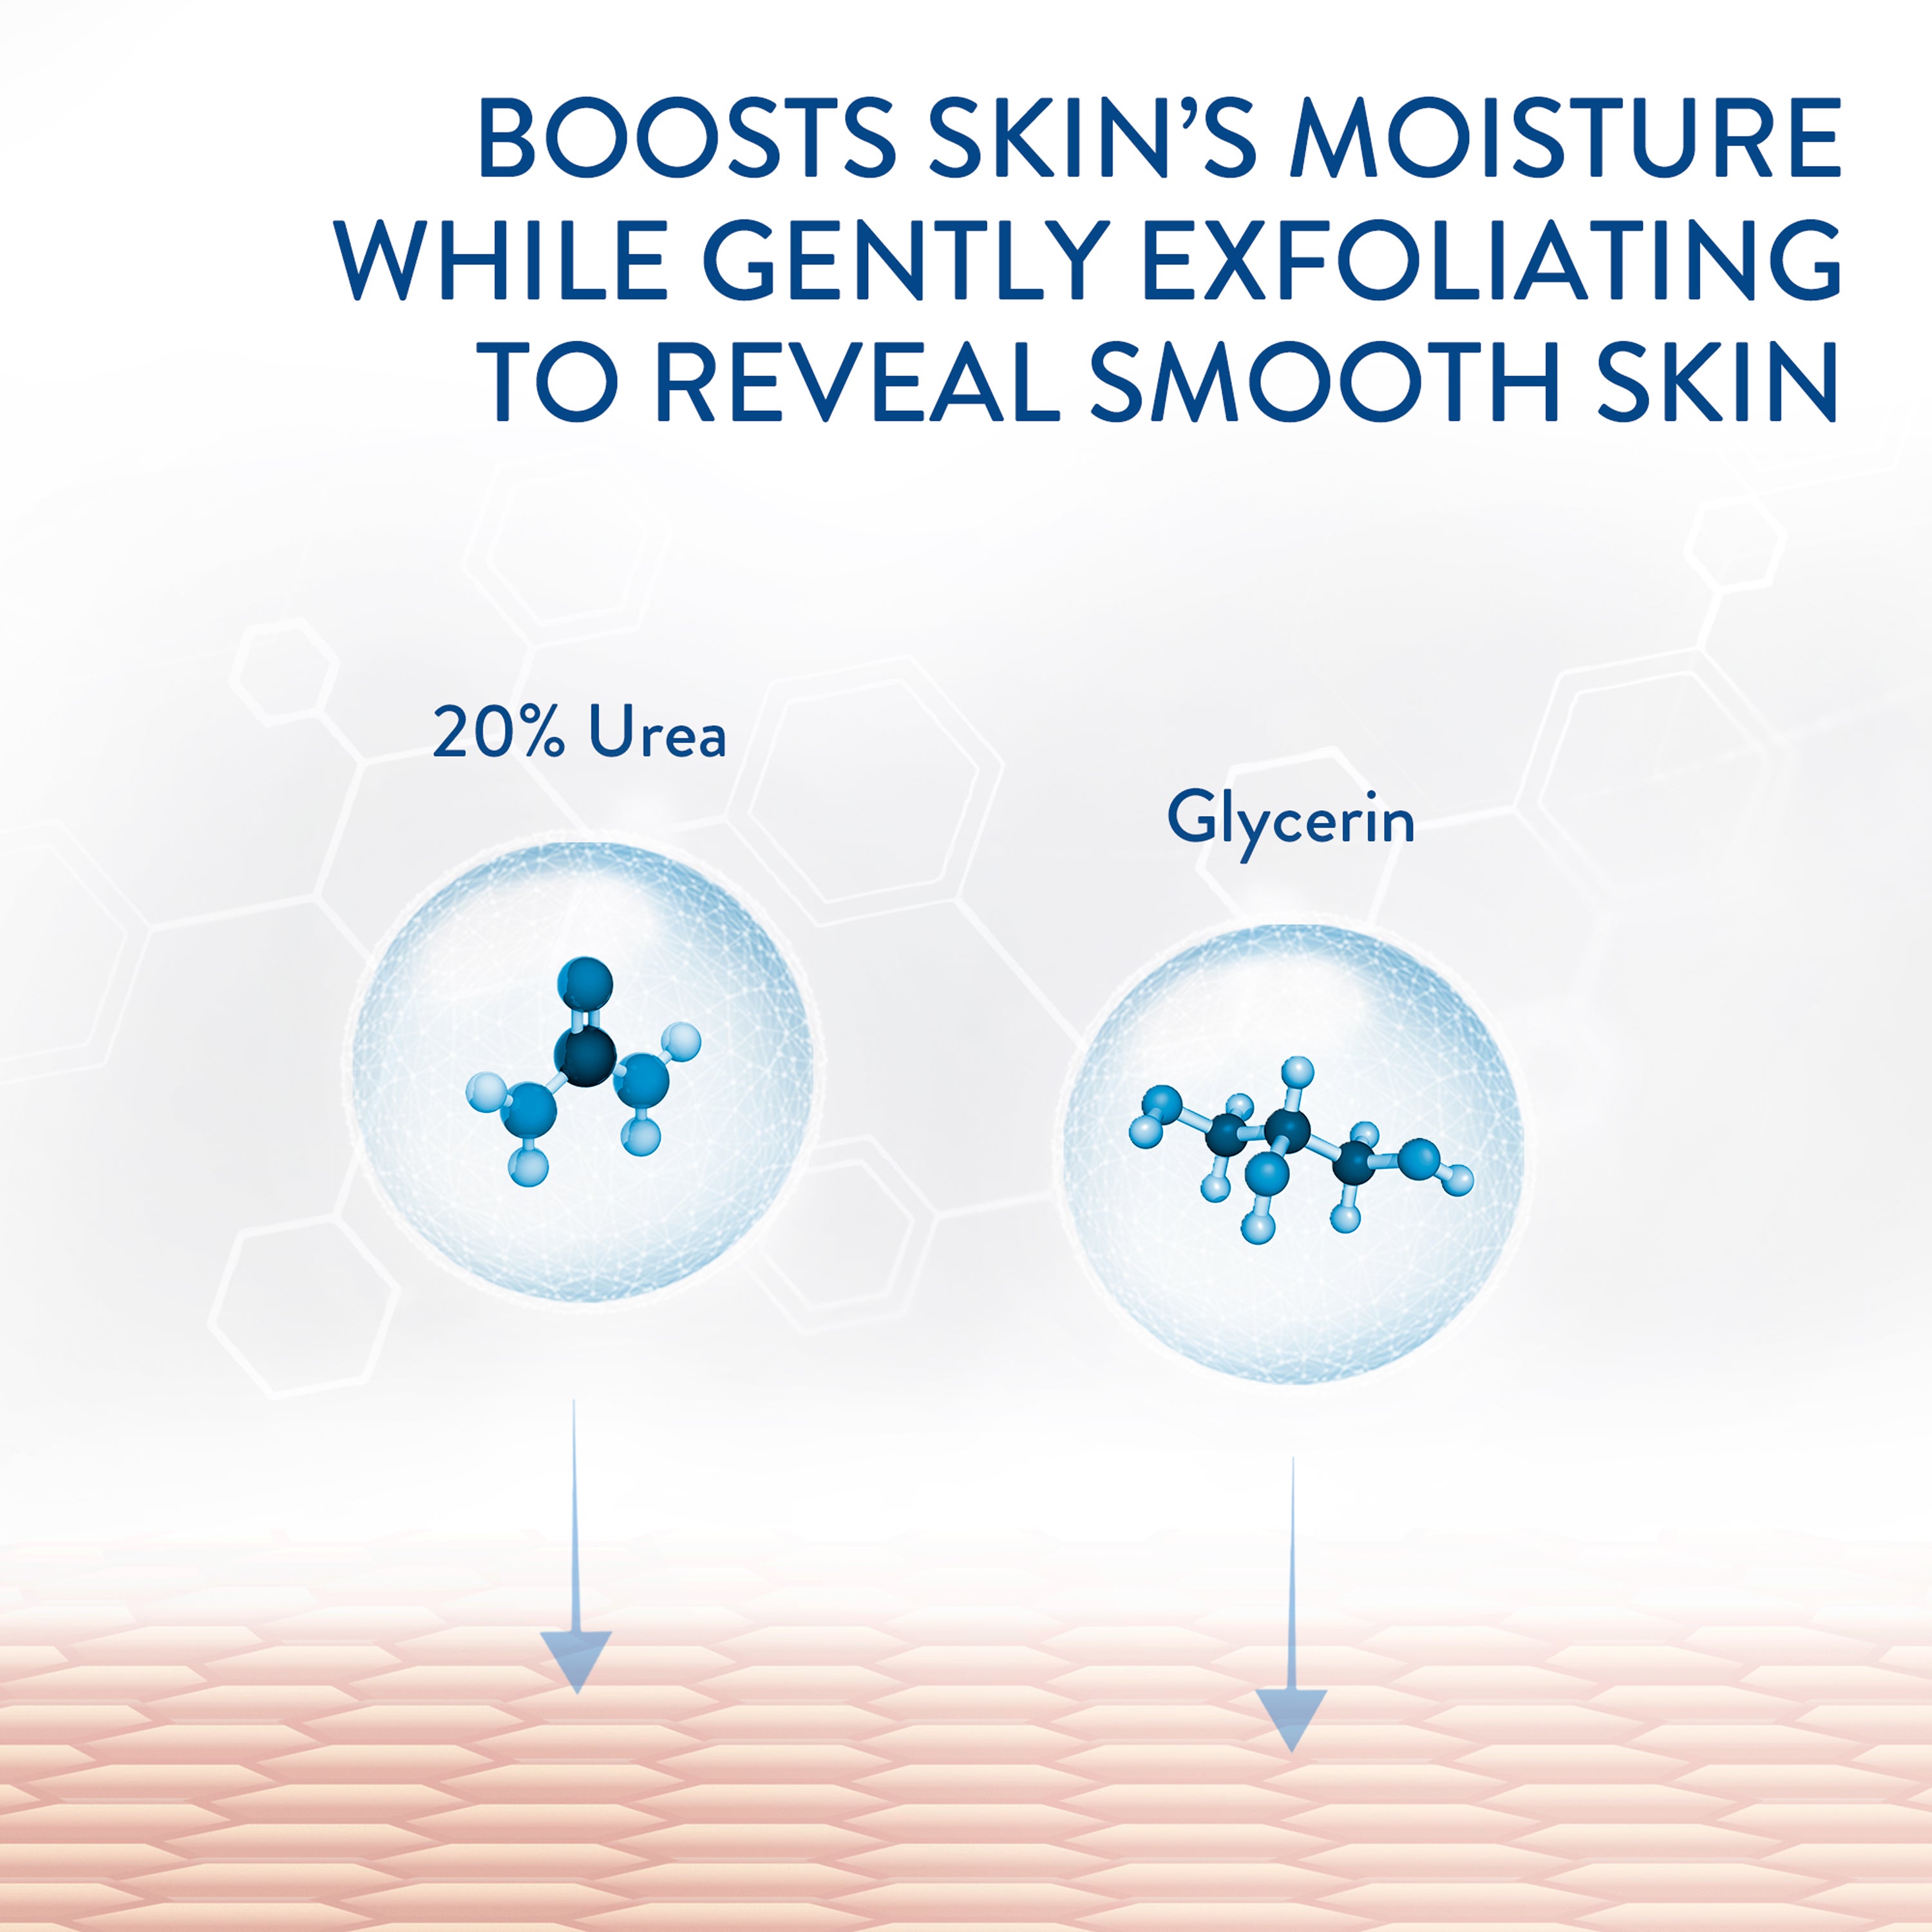 Daily Smoothing Moisturizer for Rough and Bumpy Skin Ingredients